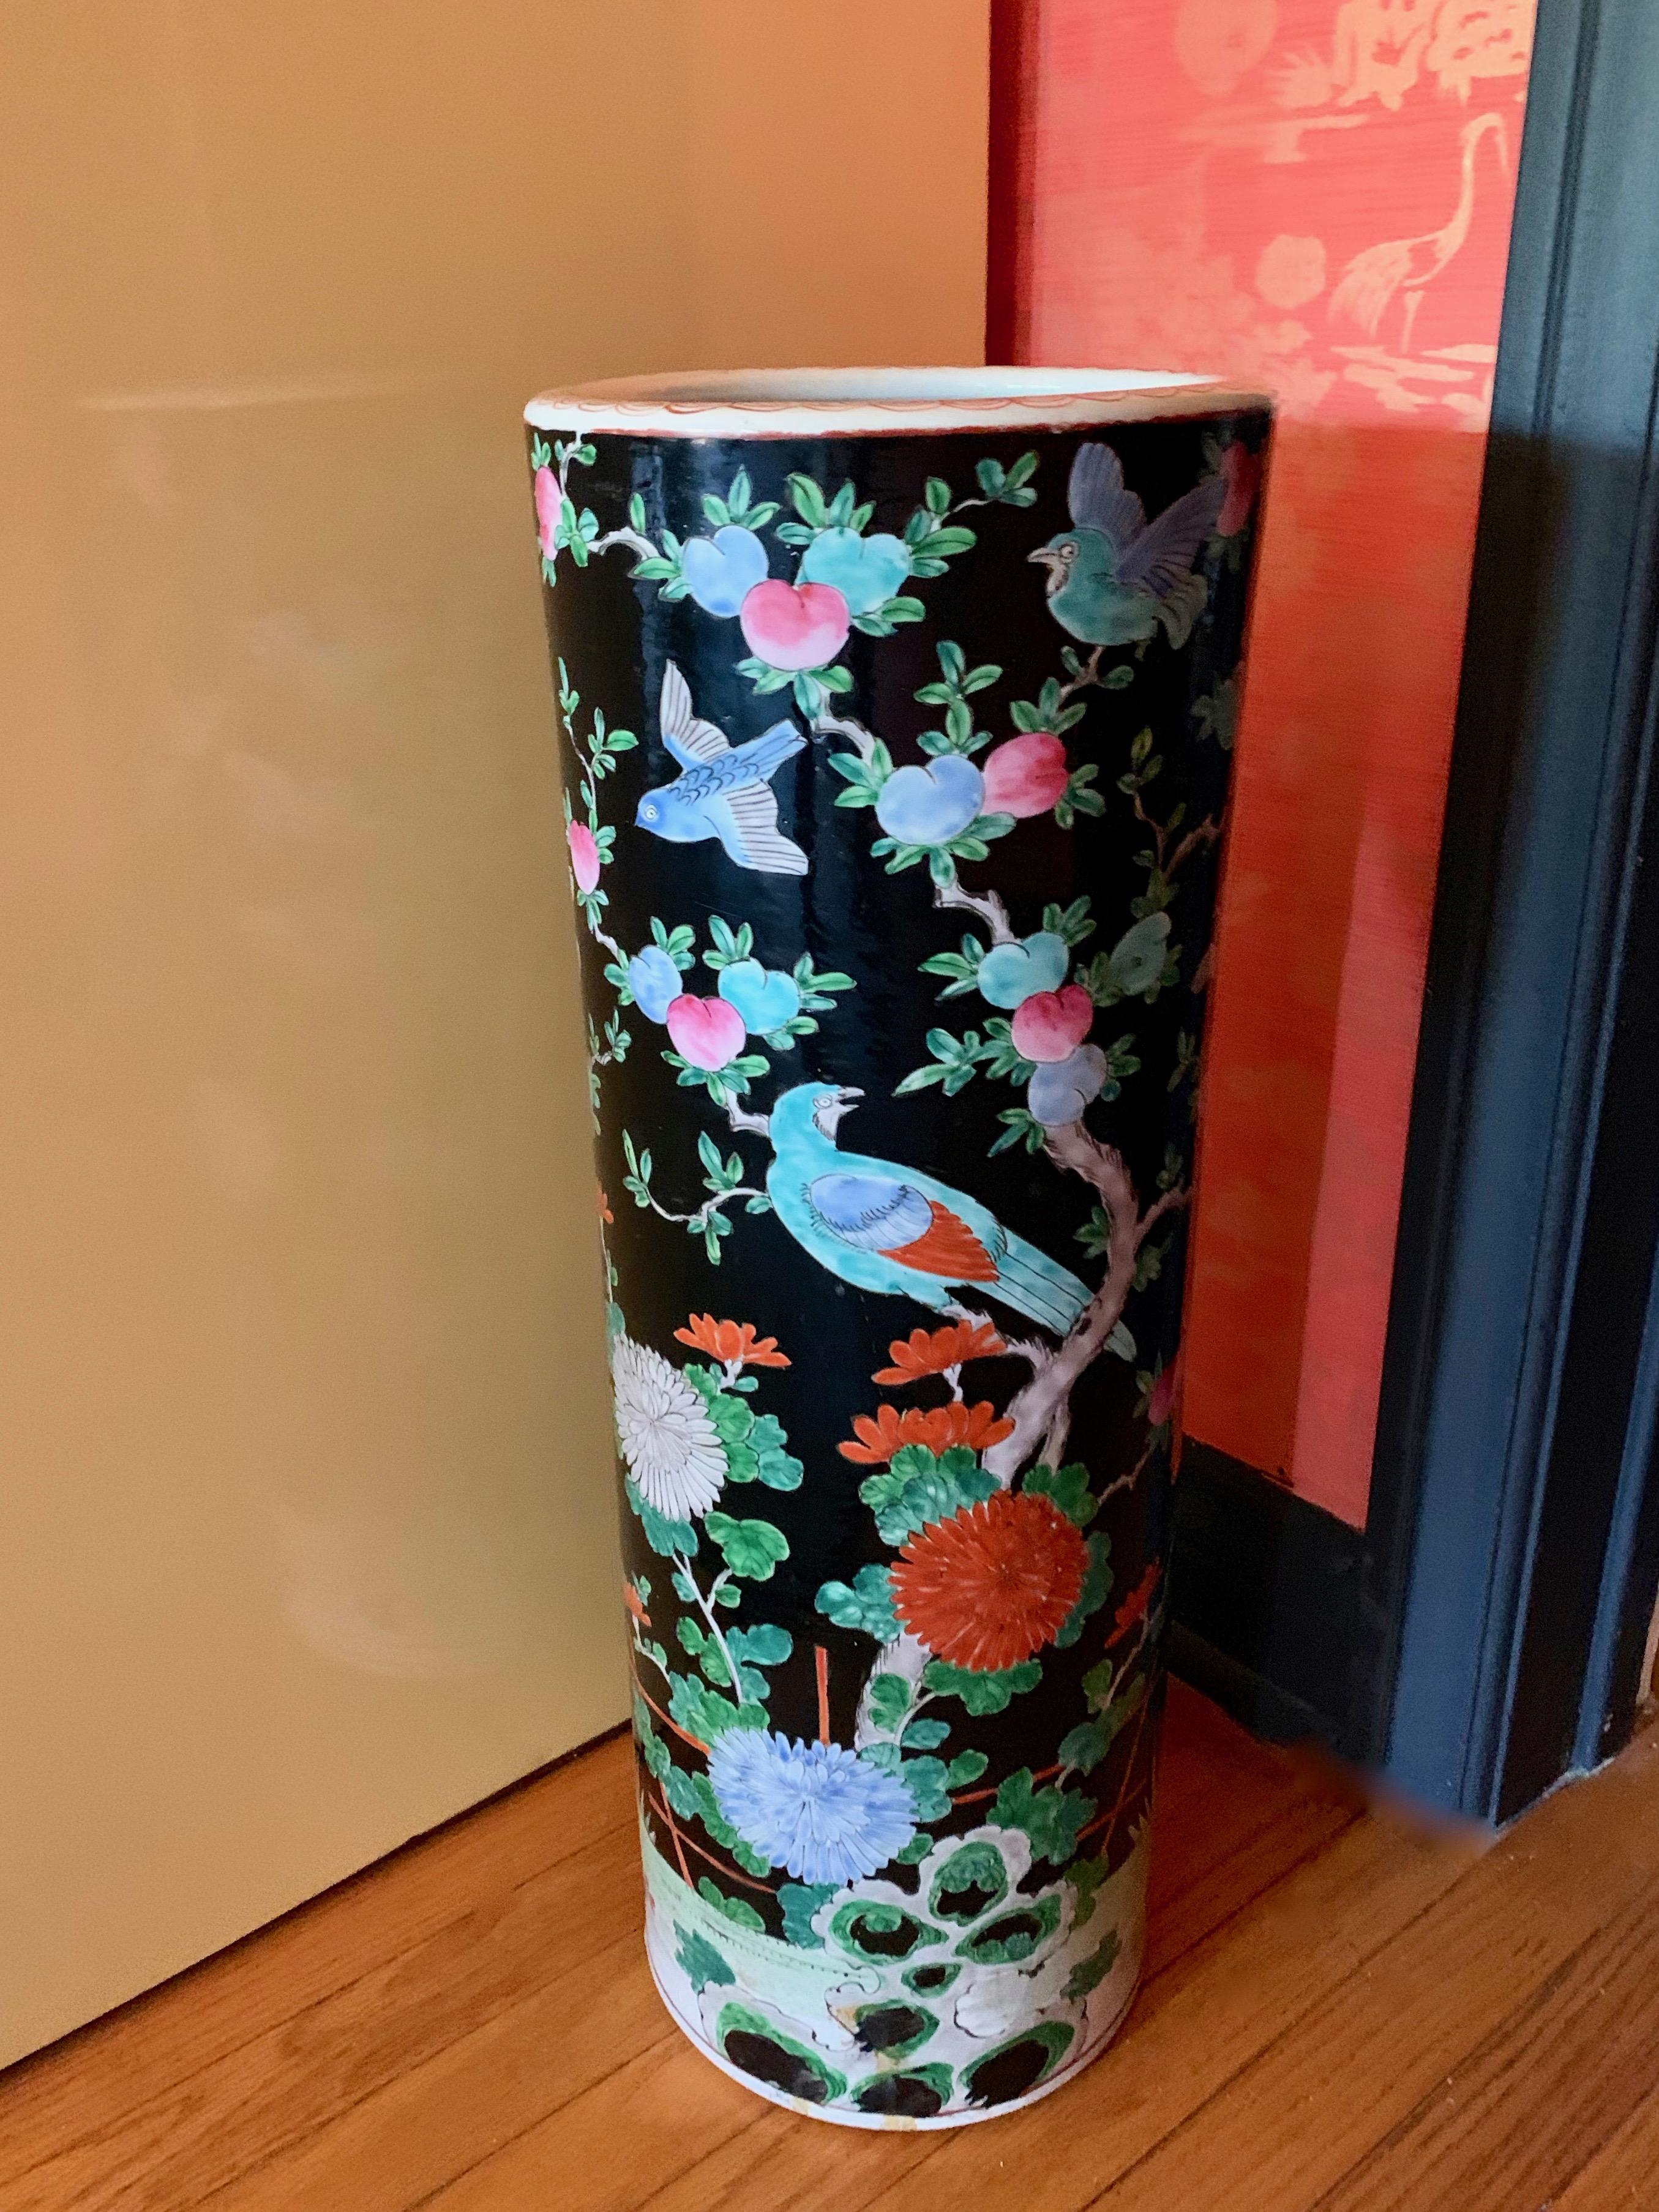 Porcelain Chinese umbrella Stand vase - Classic bold colors in designs of flowers, birds, and foliage. A handsome hand painted compliment to any entry, and at 18 pounds a substantial piece that will hold any number of umbrellas. Also a wonderfully